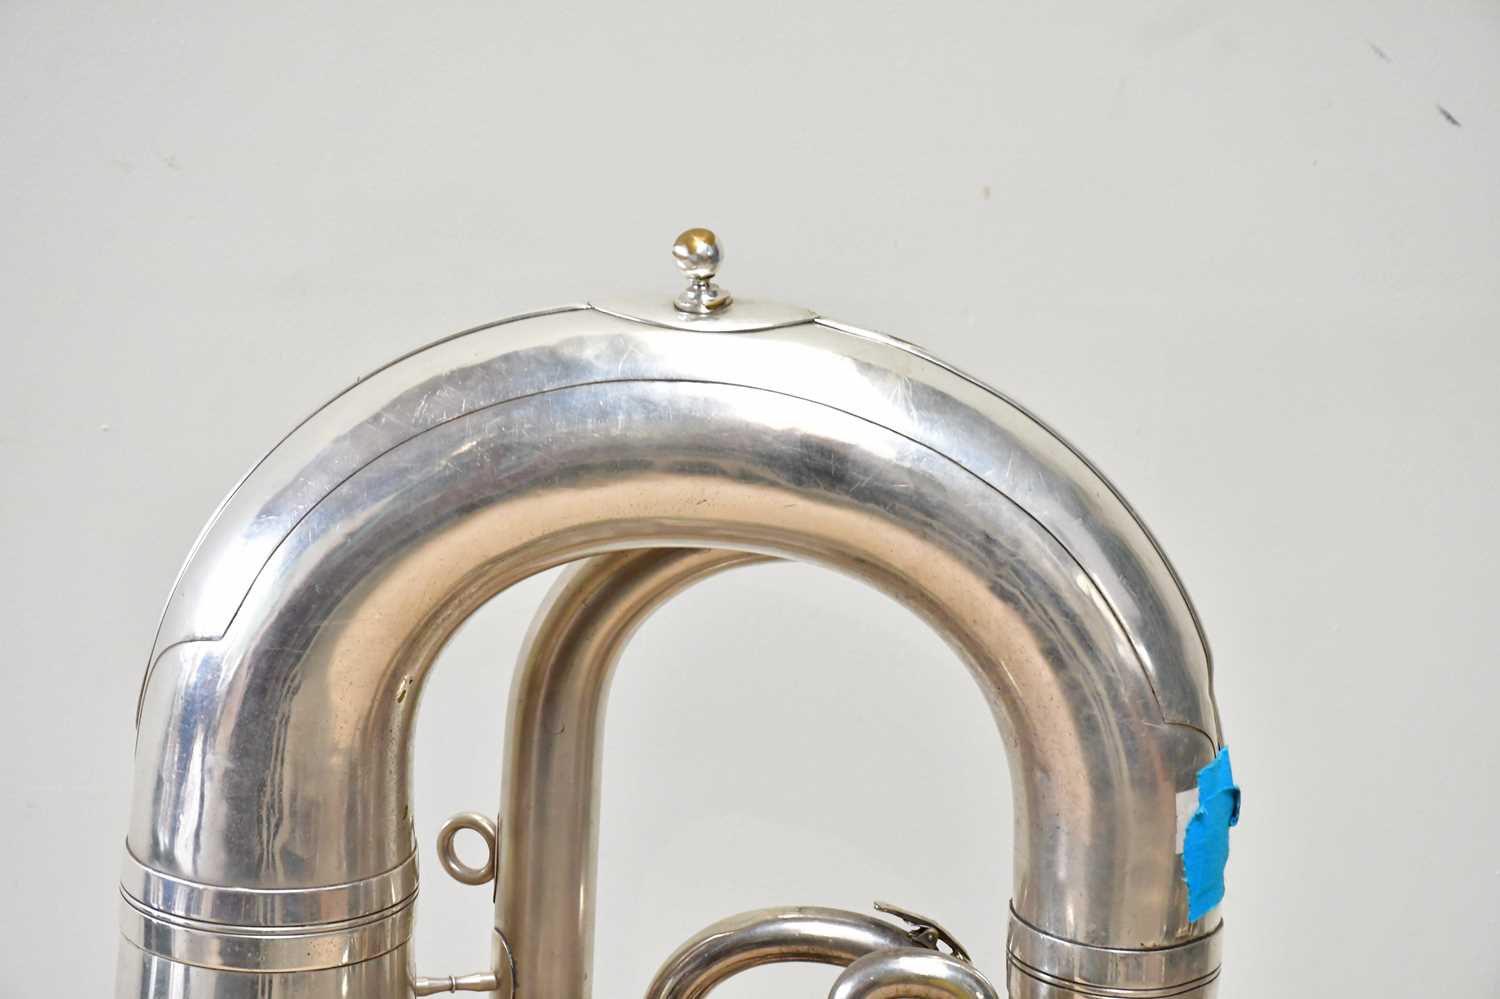 BOOSEY & HAWKES; an Imperial tuba, numbered 584759, with two mouth pieces, stand and accessories. - Image 2 of 9